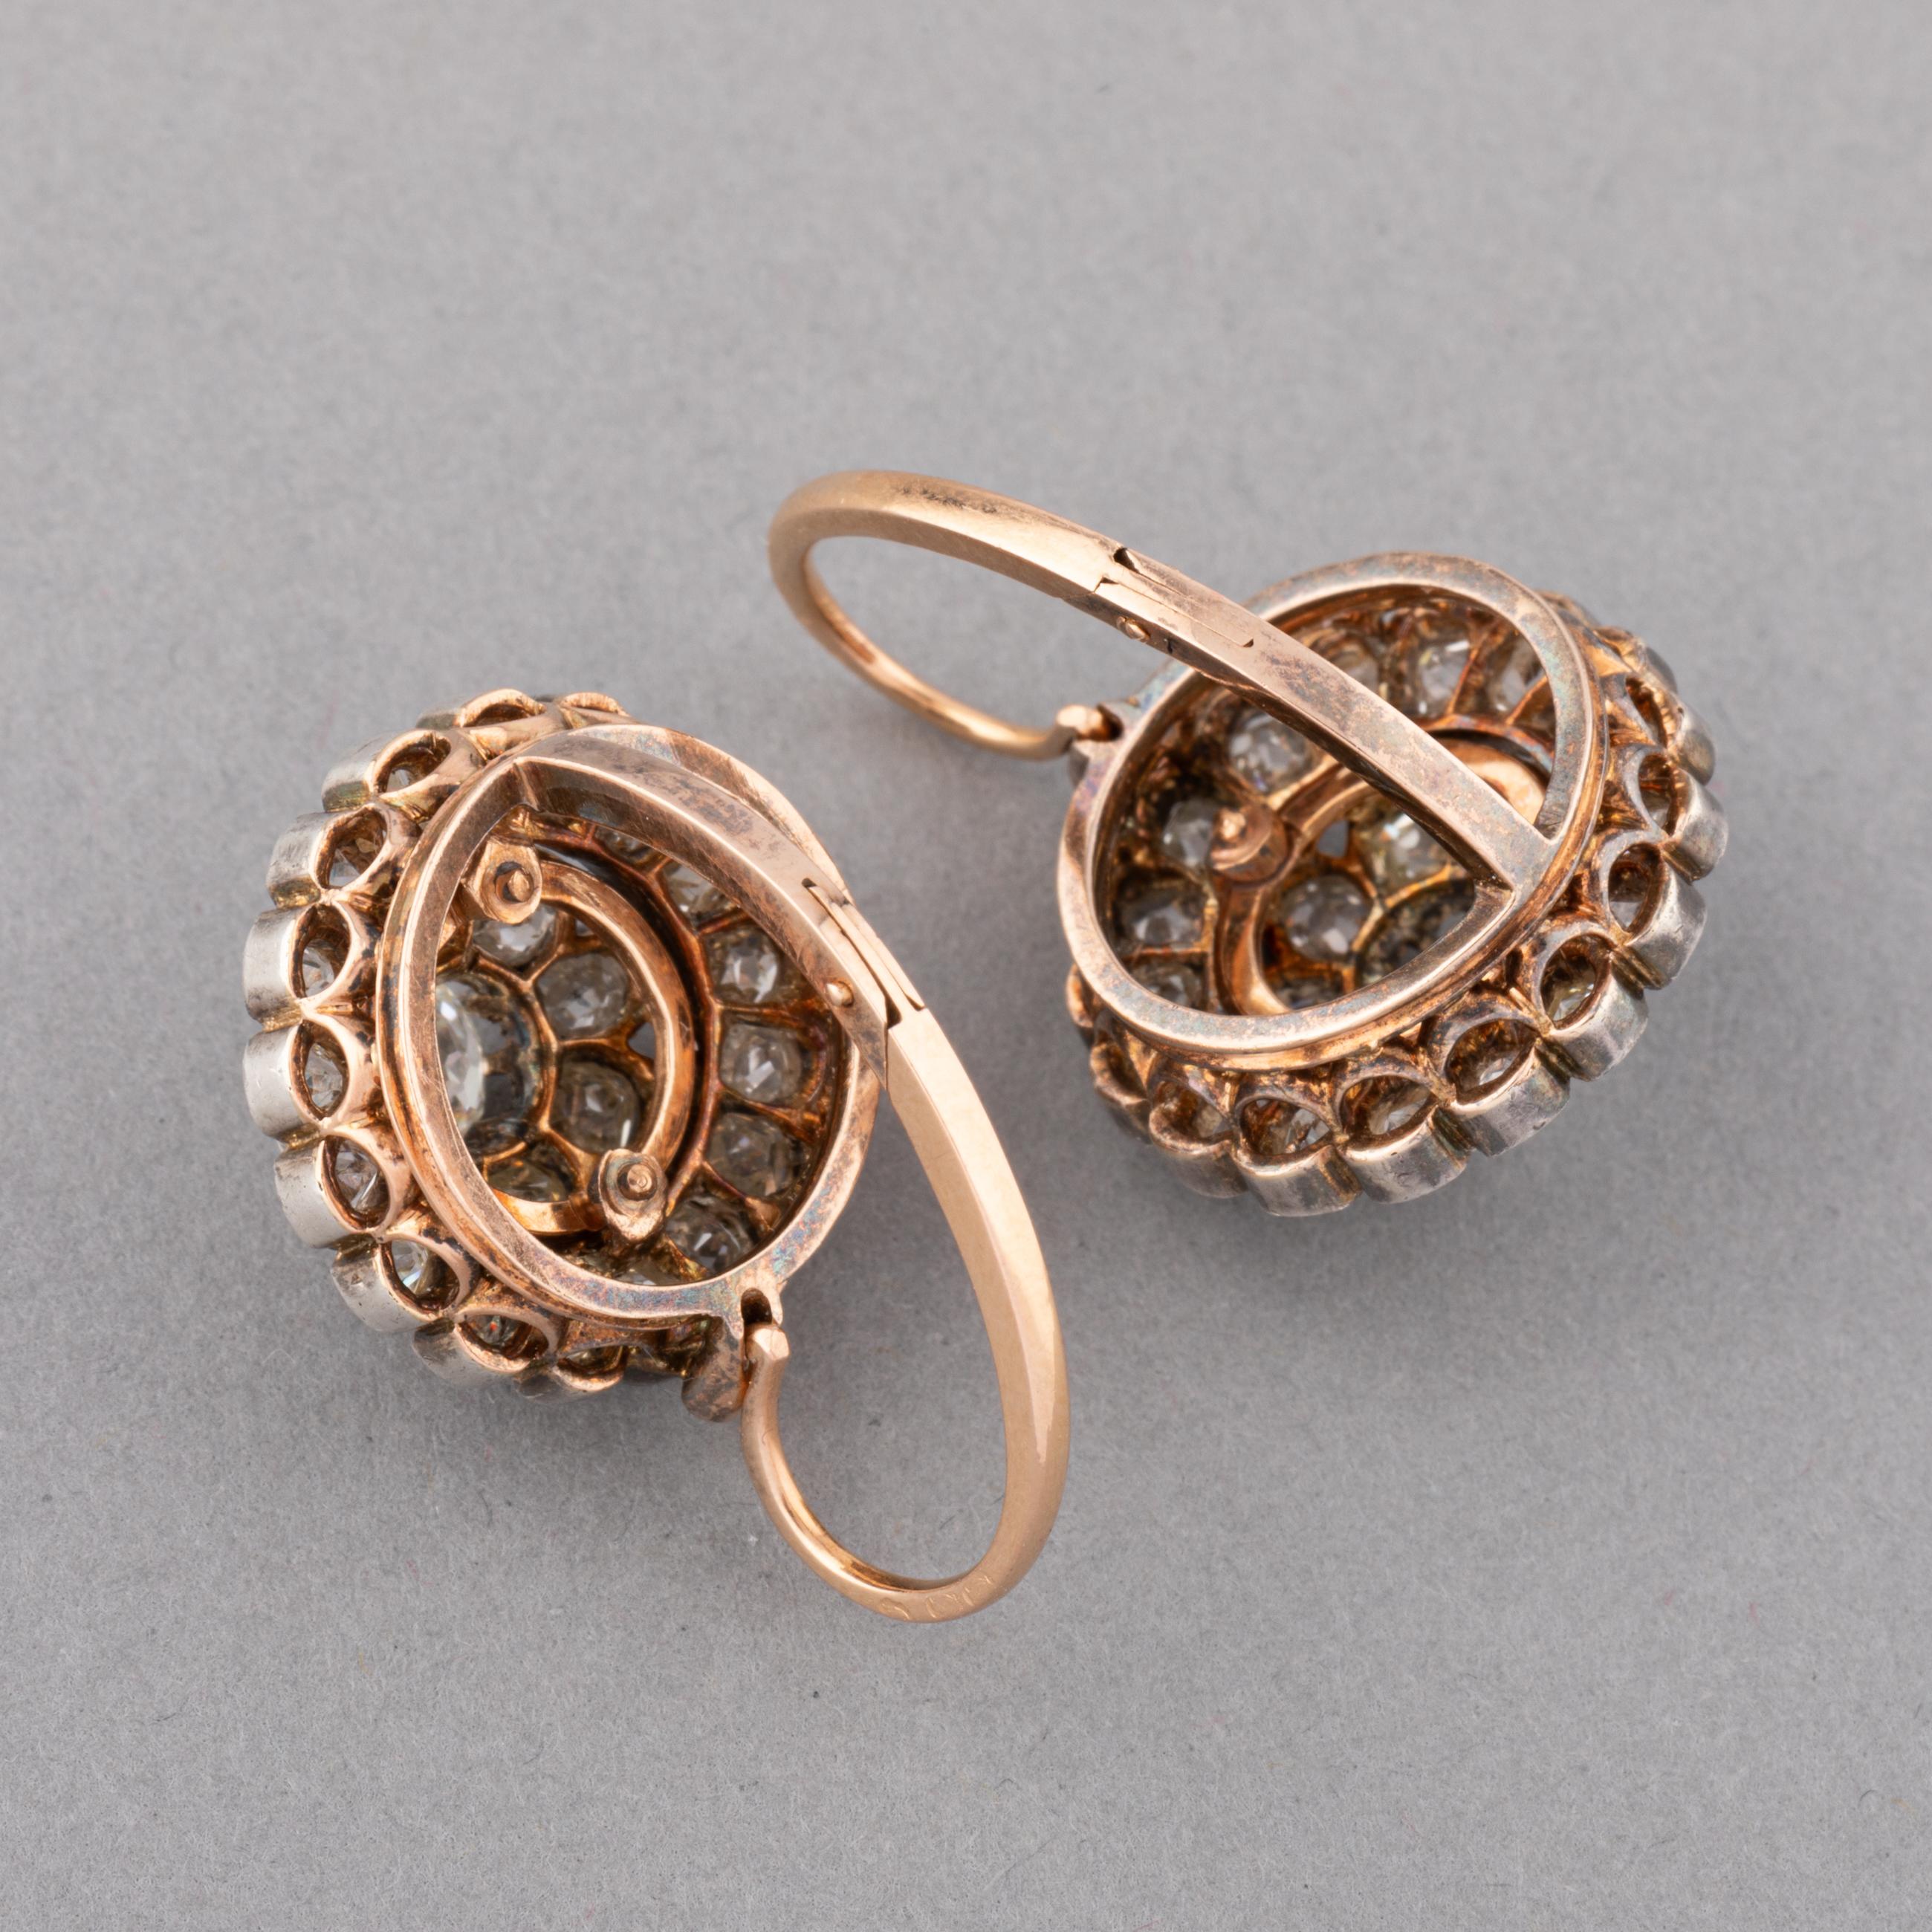 5 Carats Diamonds Antique French Earrings For Sale 2